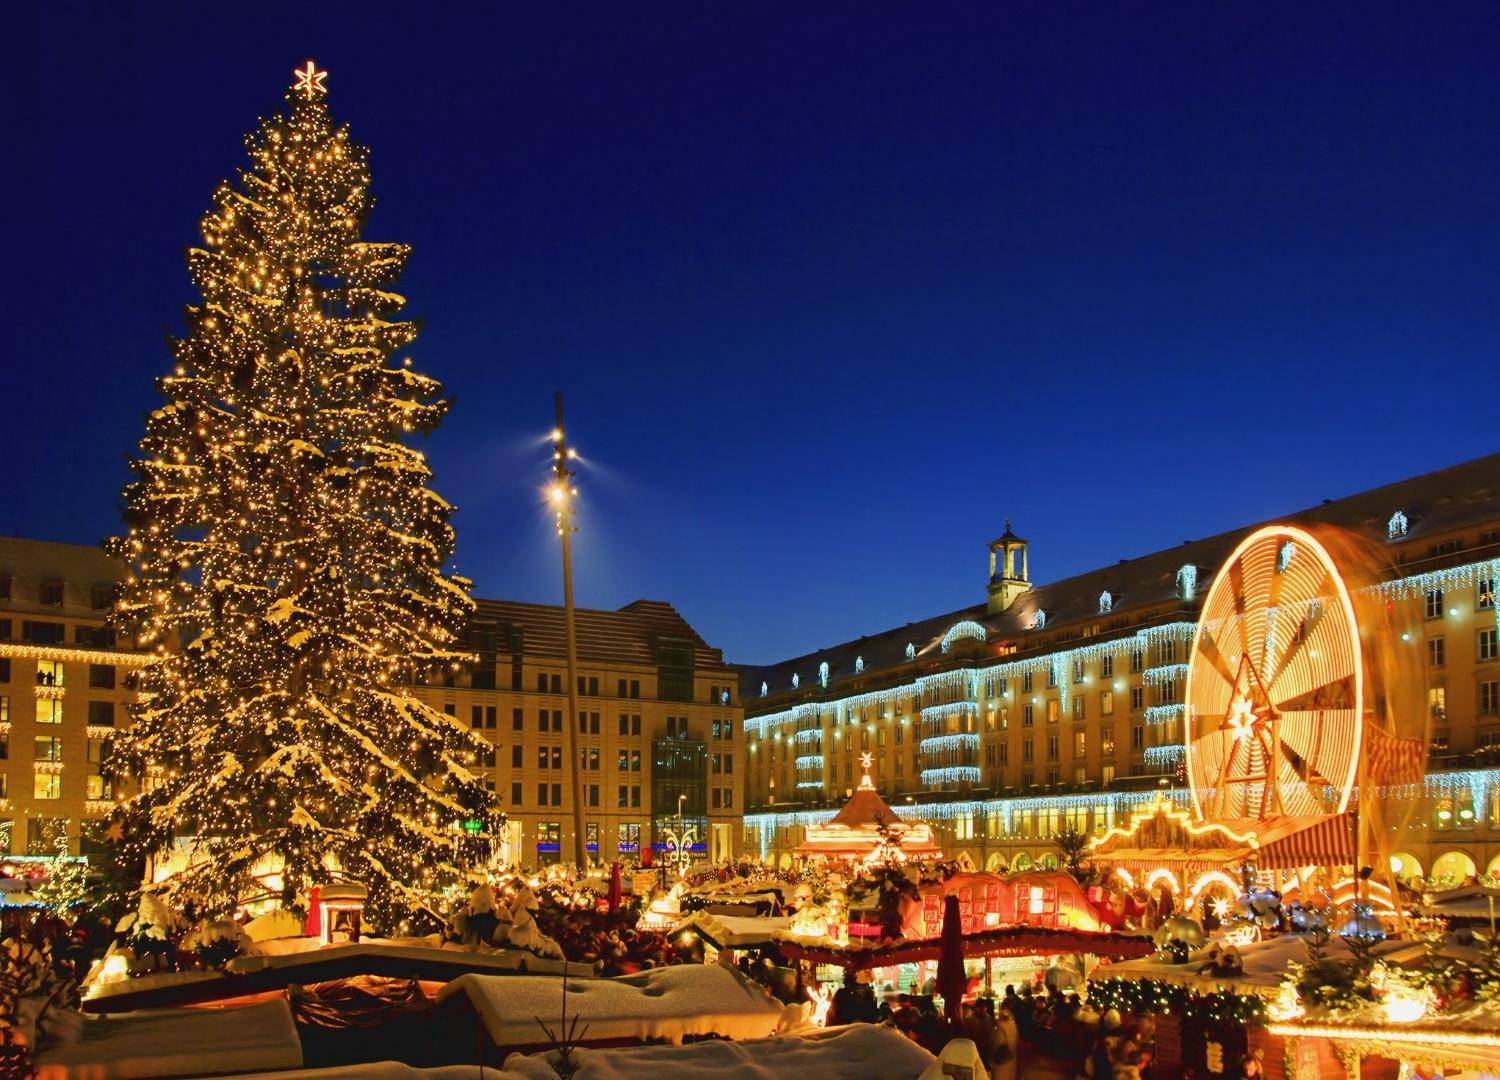 Dresden Christmas Market Most beautiful Christmas Markets in Germany